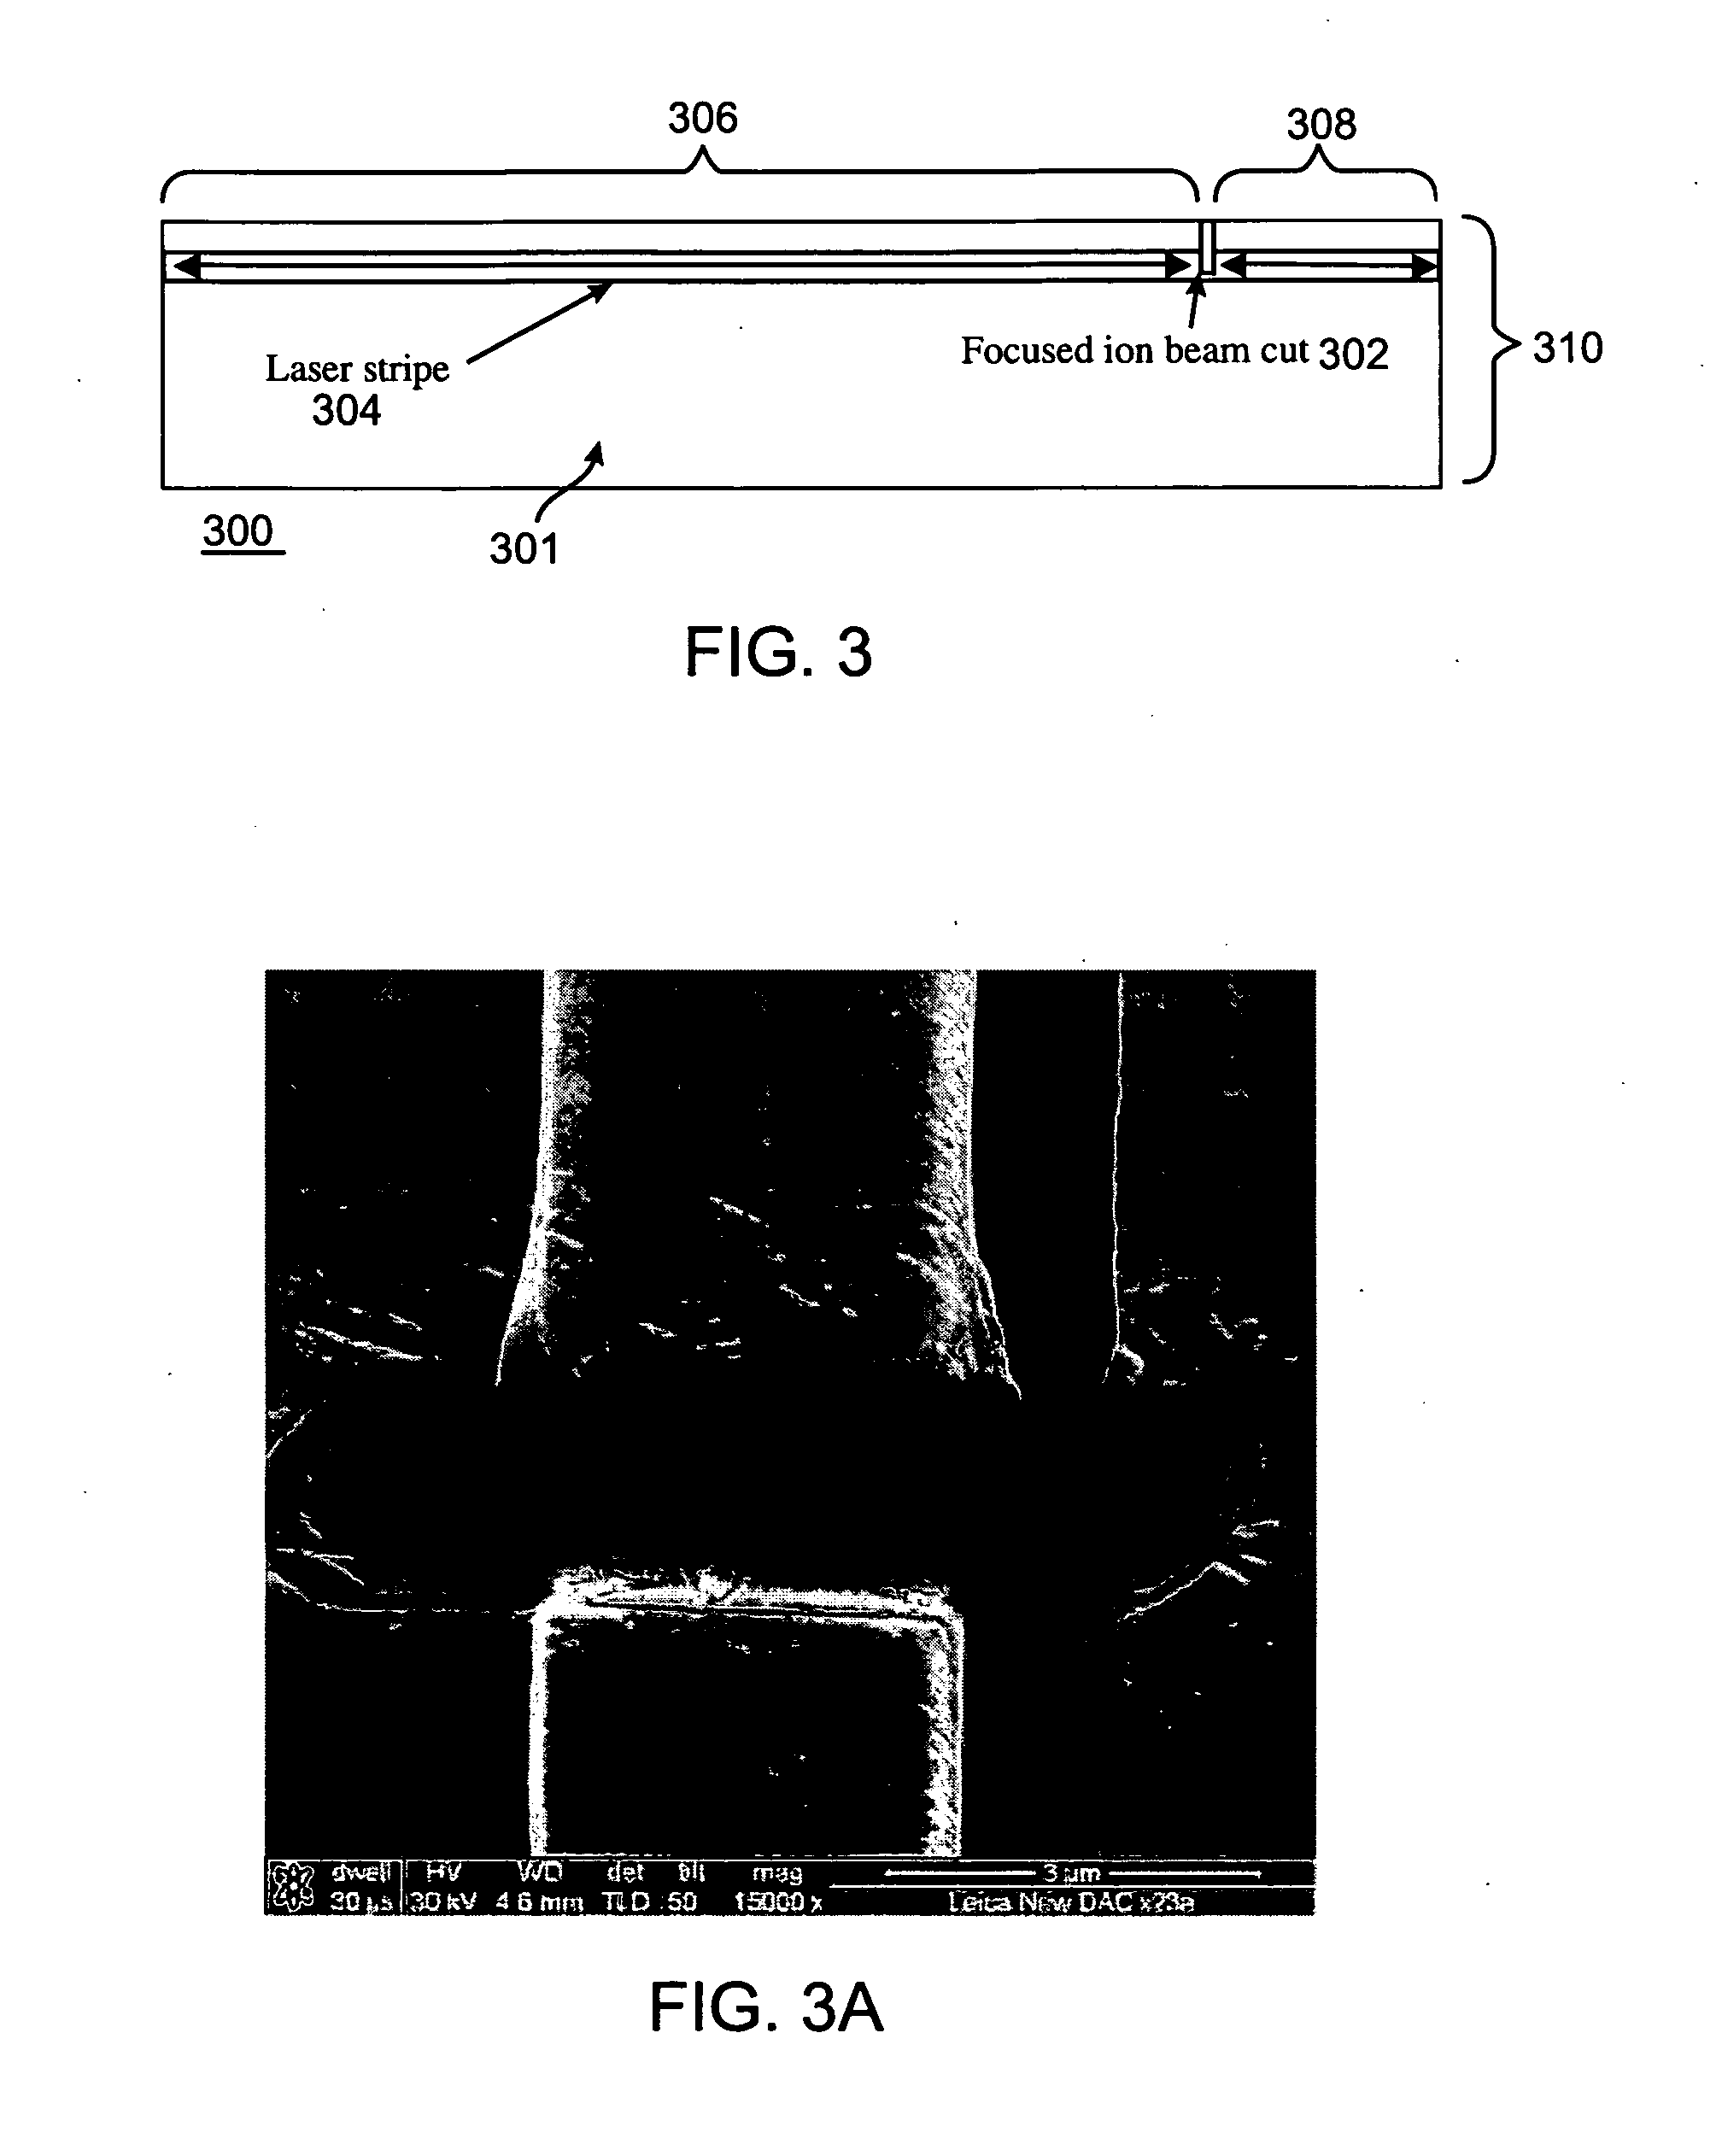 Material processing method for semiconductor lasers